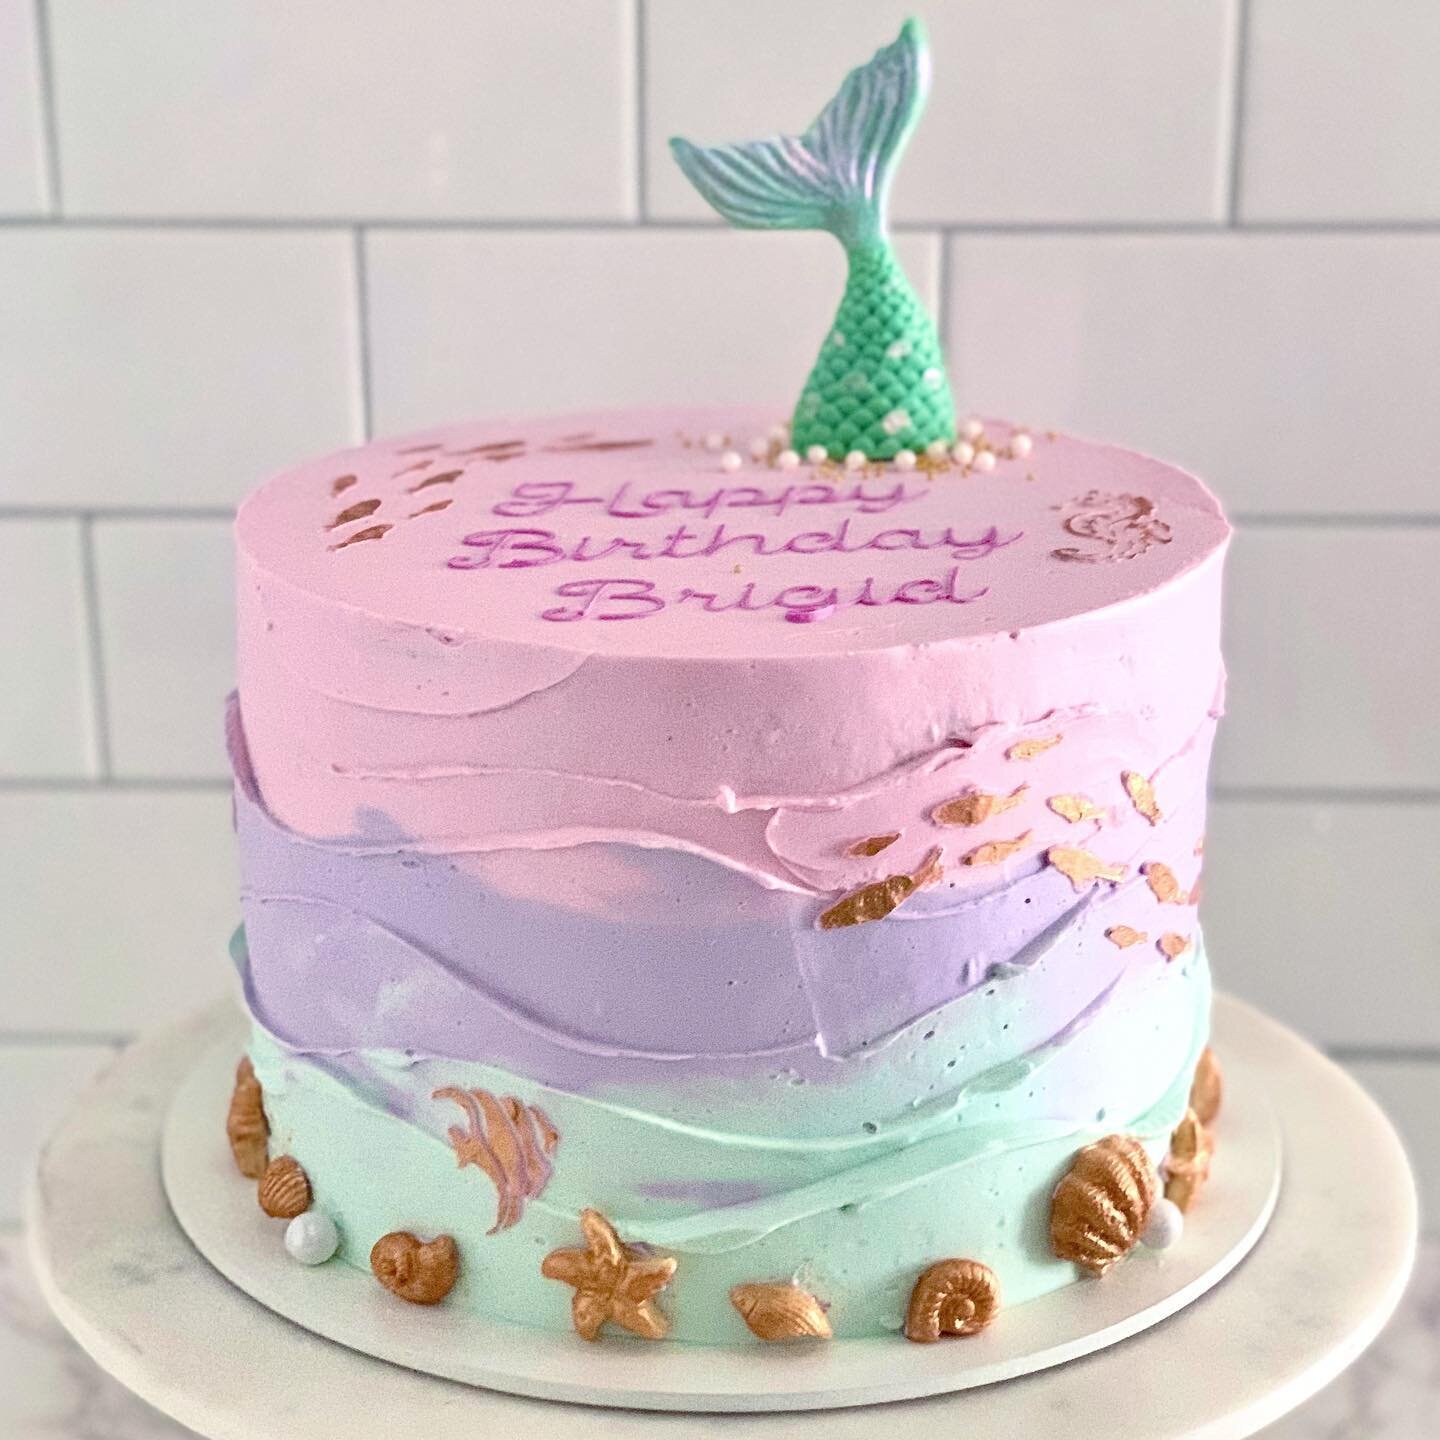 A mermaid cake for my friend&rsquo;s daughter 🧜🏼&zwj;♀️ Happy 6th Brigid!

Inside is vanilla bean cake and cookies &amp; cream buttercream